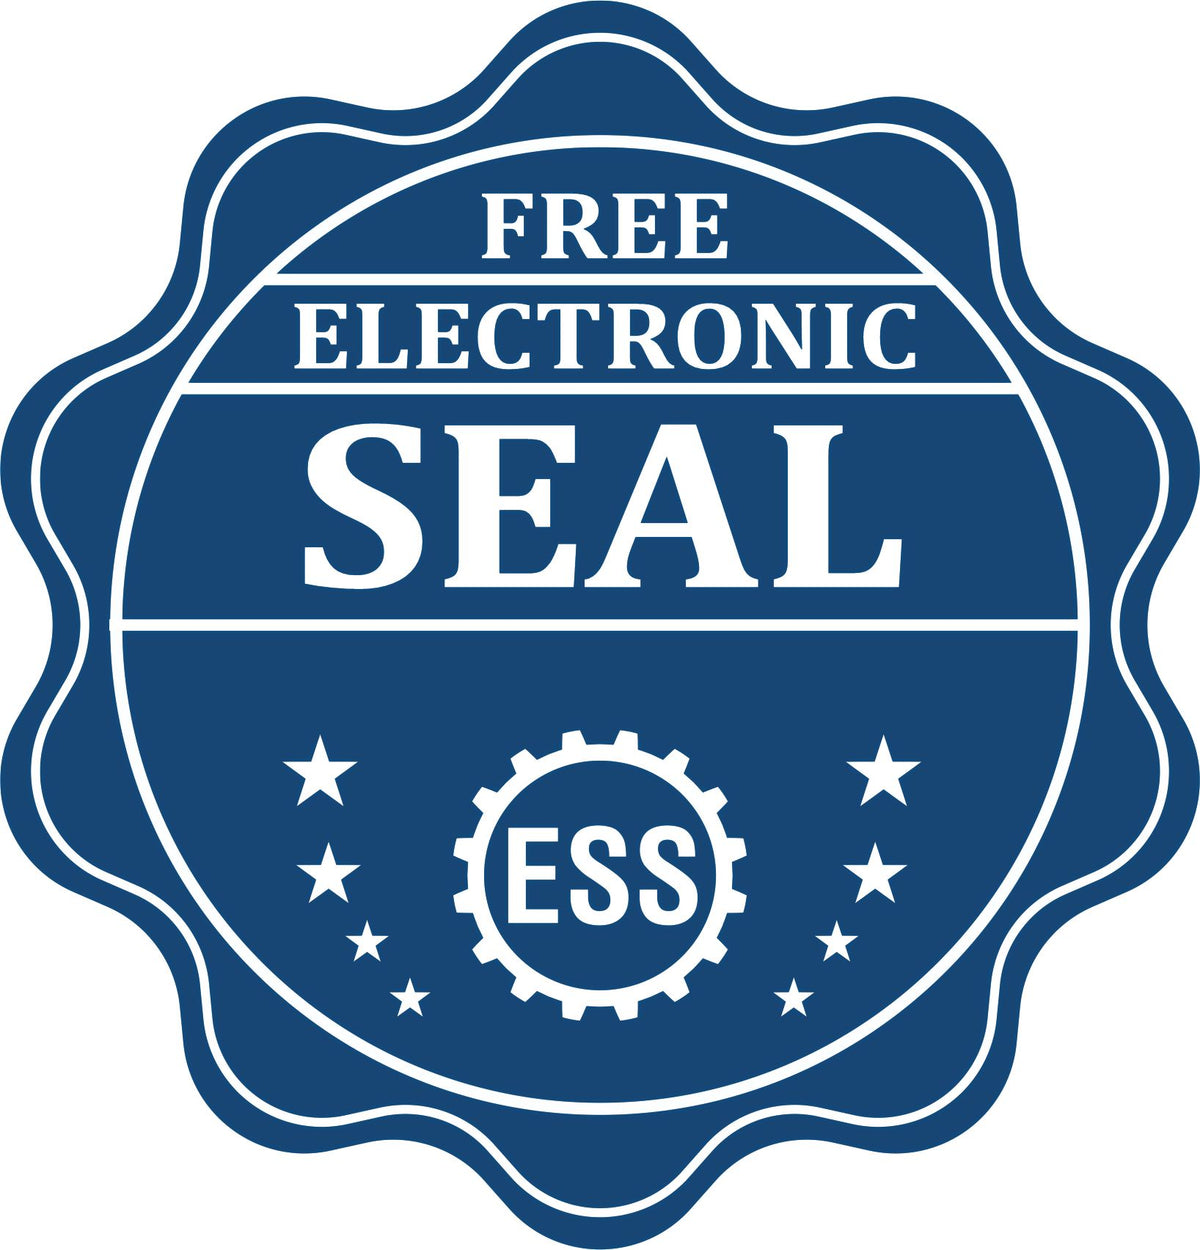 A badge showing a free electronic seal for the Delaware Desk Architect Embossing Seal with stars and the ESS gear on the emblem.